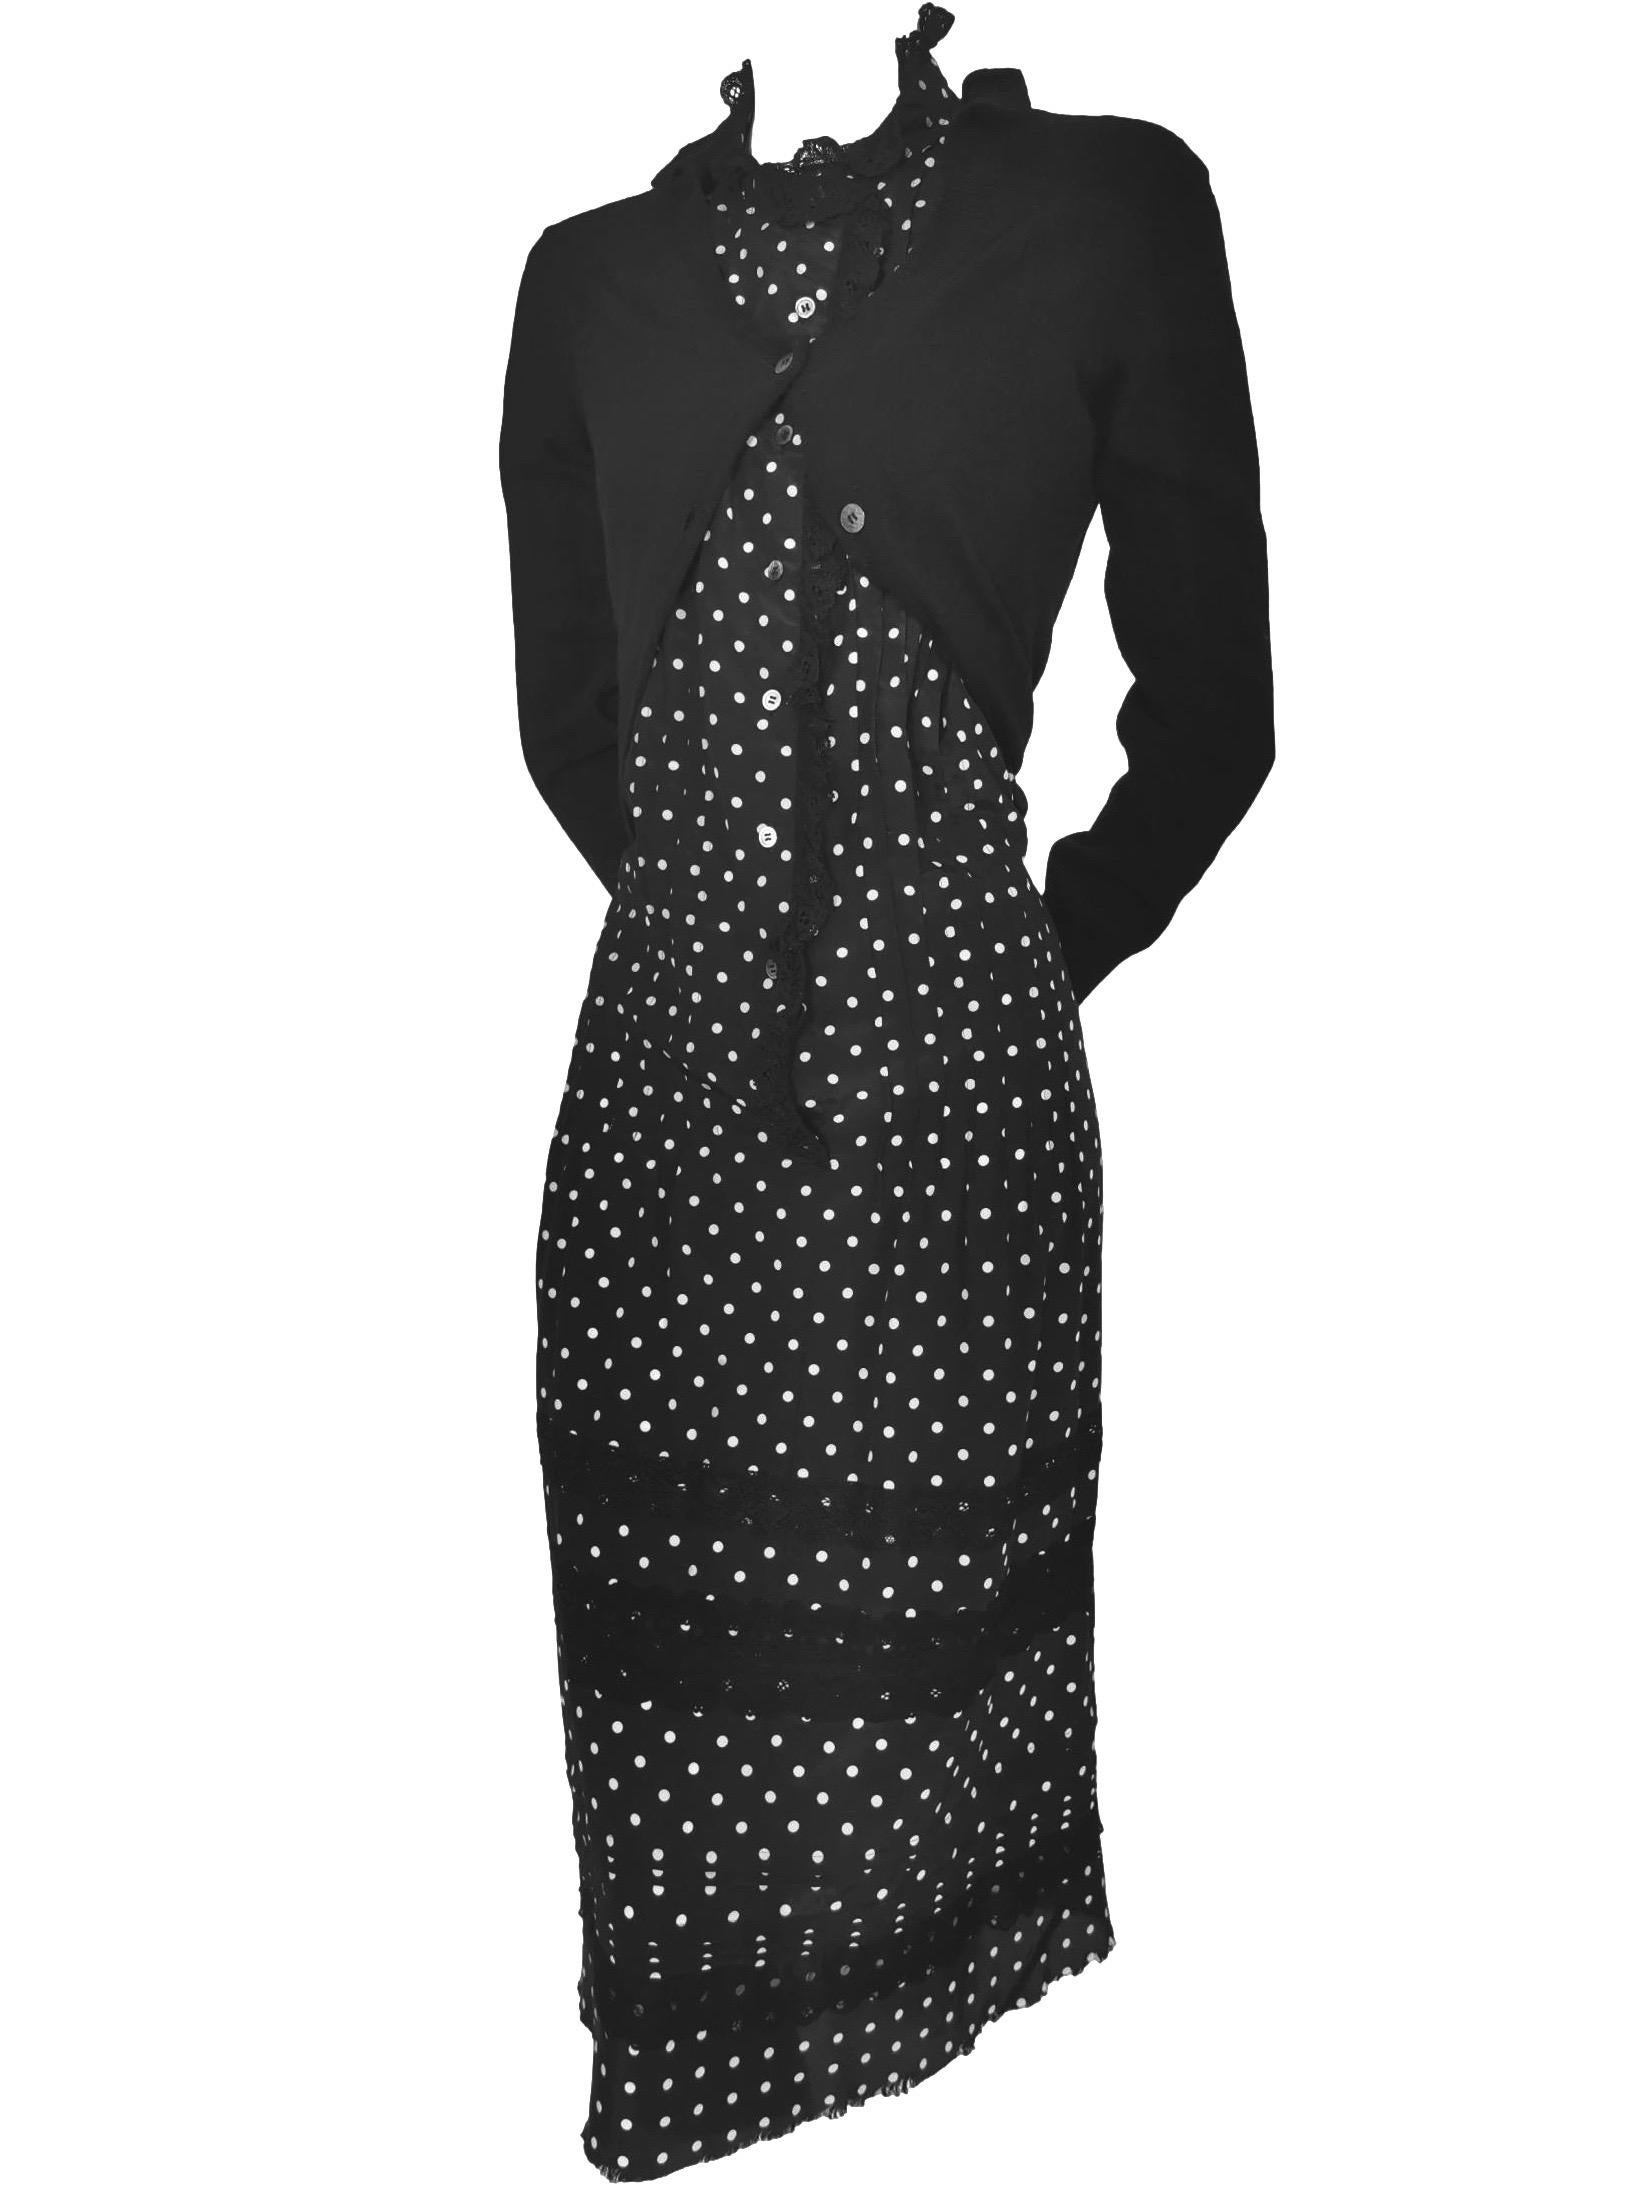 Junya Watanabe Comme des Garcons Twisted Polka Dot Cardigan Dress AD 2007 In Good Condition For Sale In Bath, GB